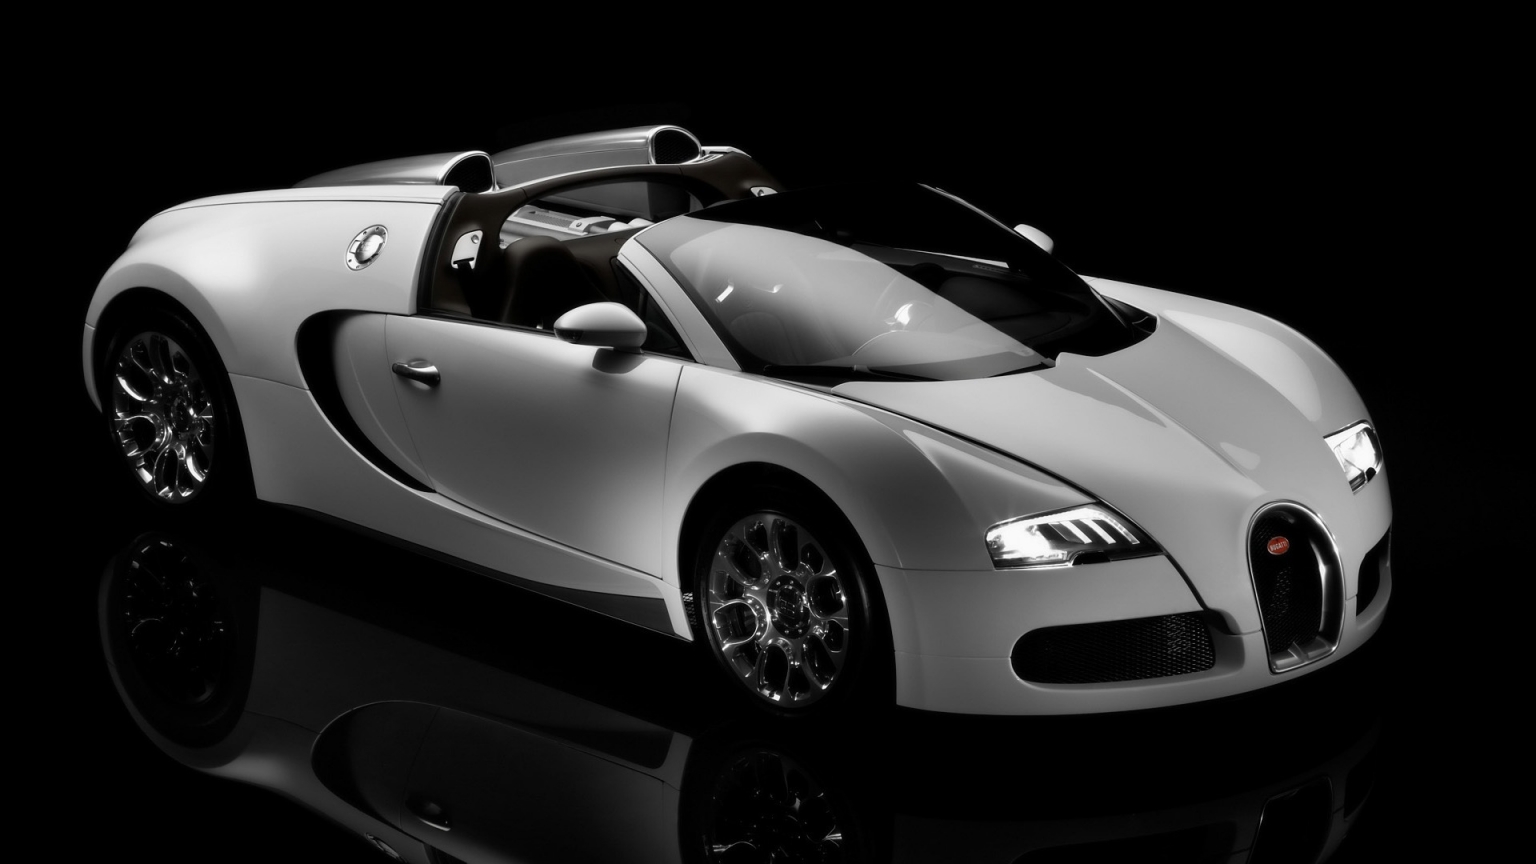 Bugatti Veyron 16.4 Grand Sport Production 2009 - Studio Front And Side for 1536 x 864 HDTV resolution